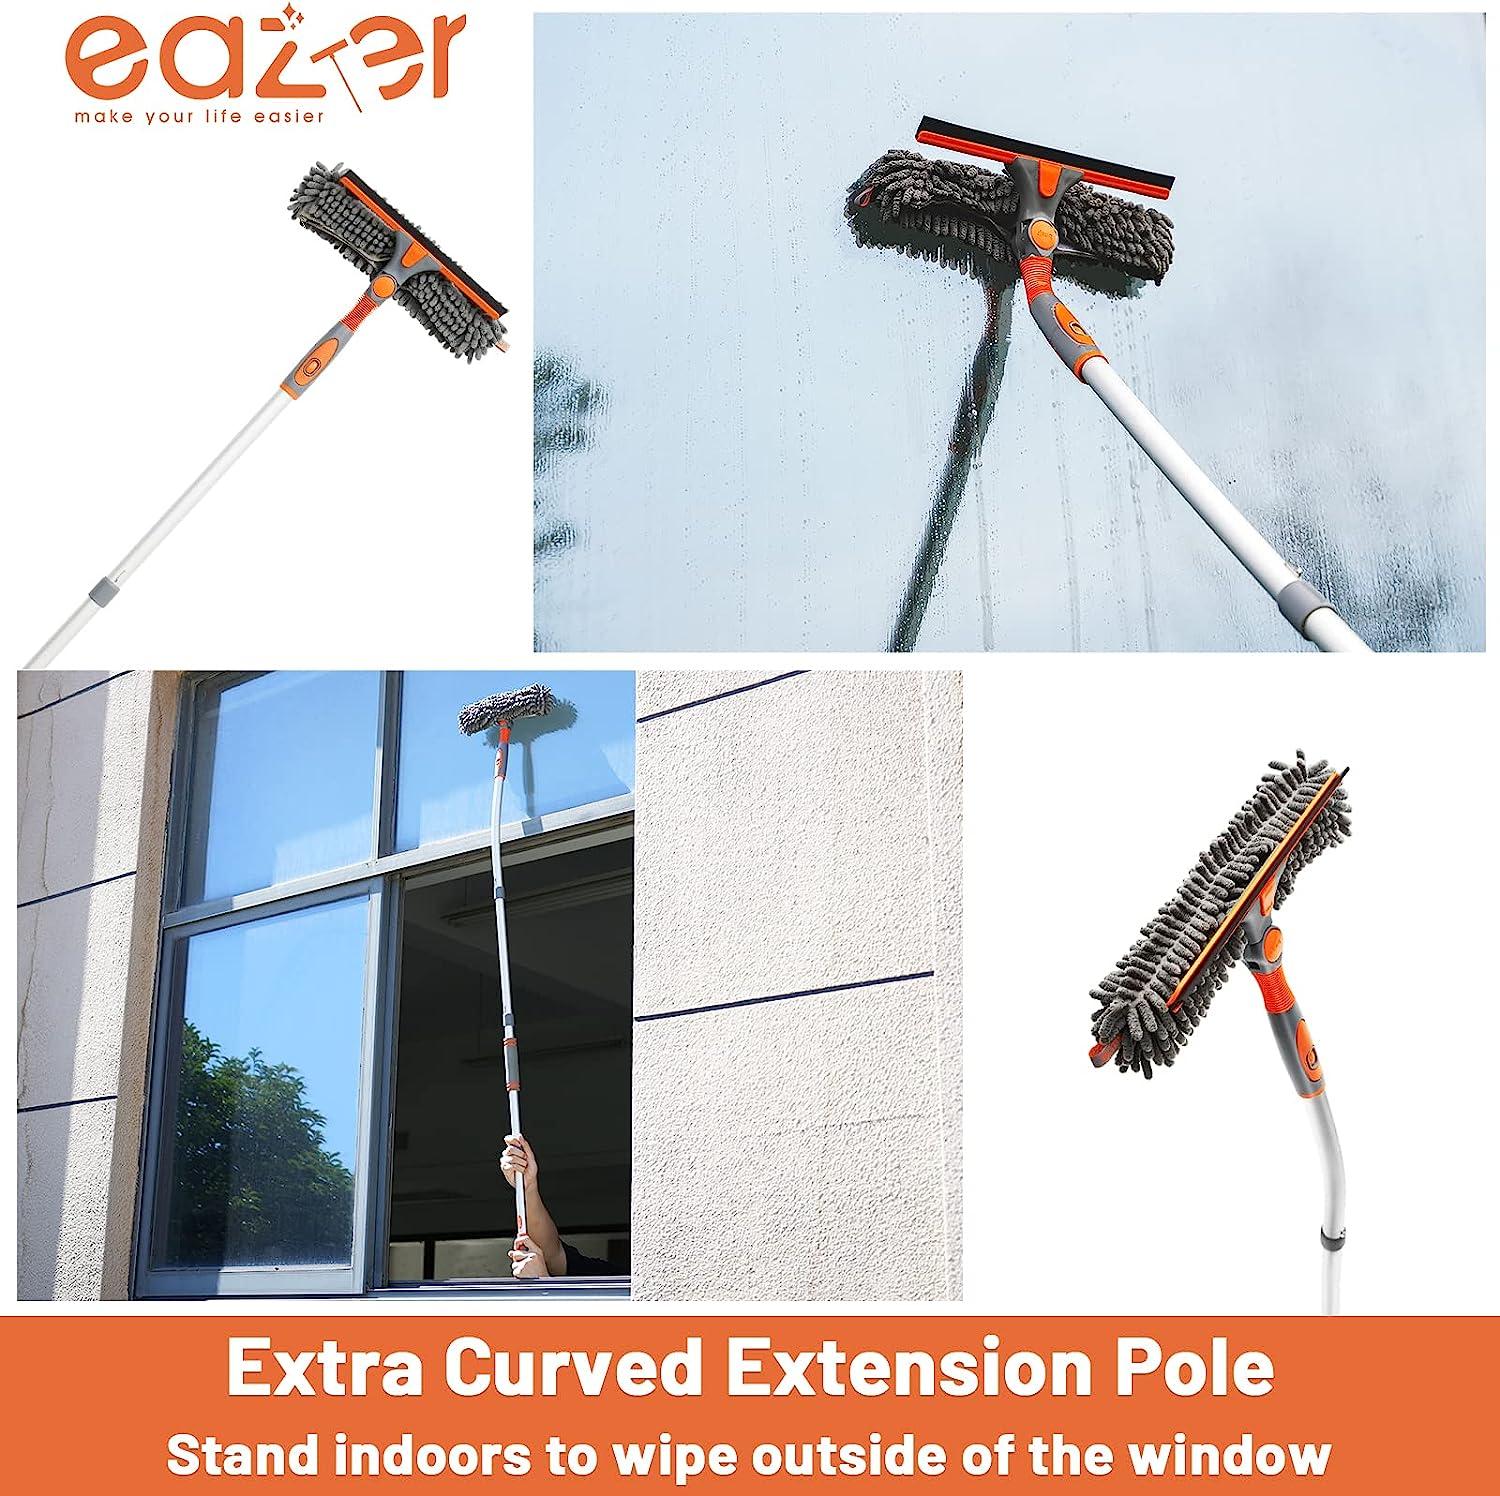 Squeegee Life Pole, Water Fed Poles